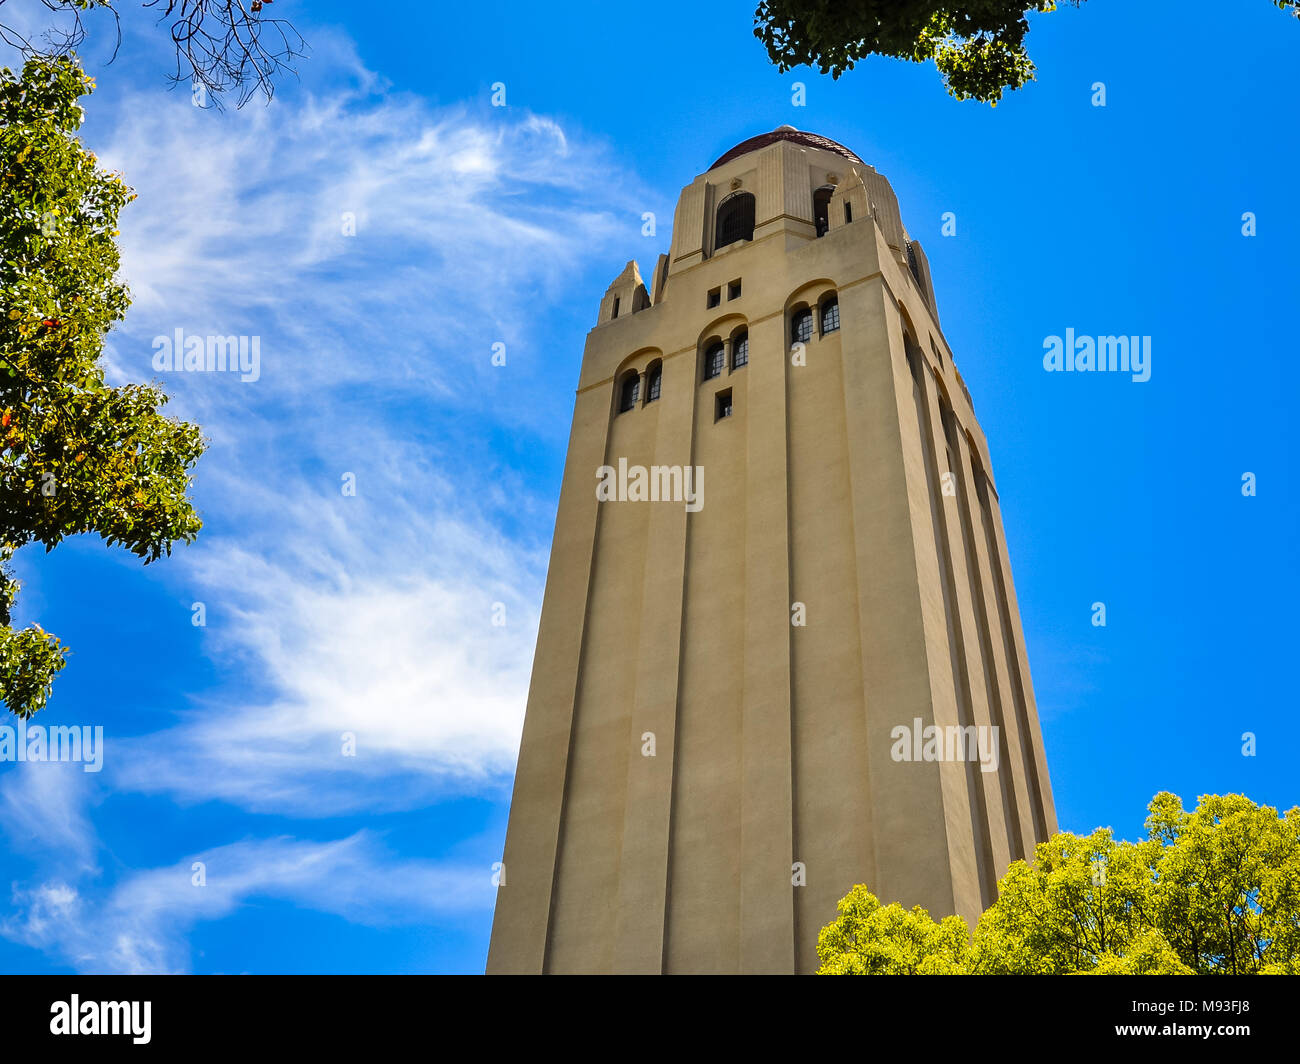 Hoover Tower - Stanford University Campus, Palo Alto, California Stock Photo